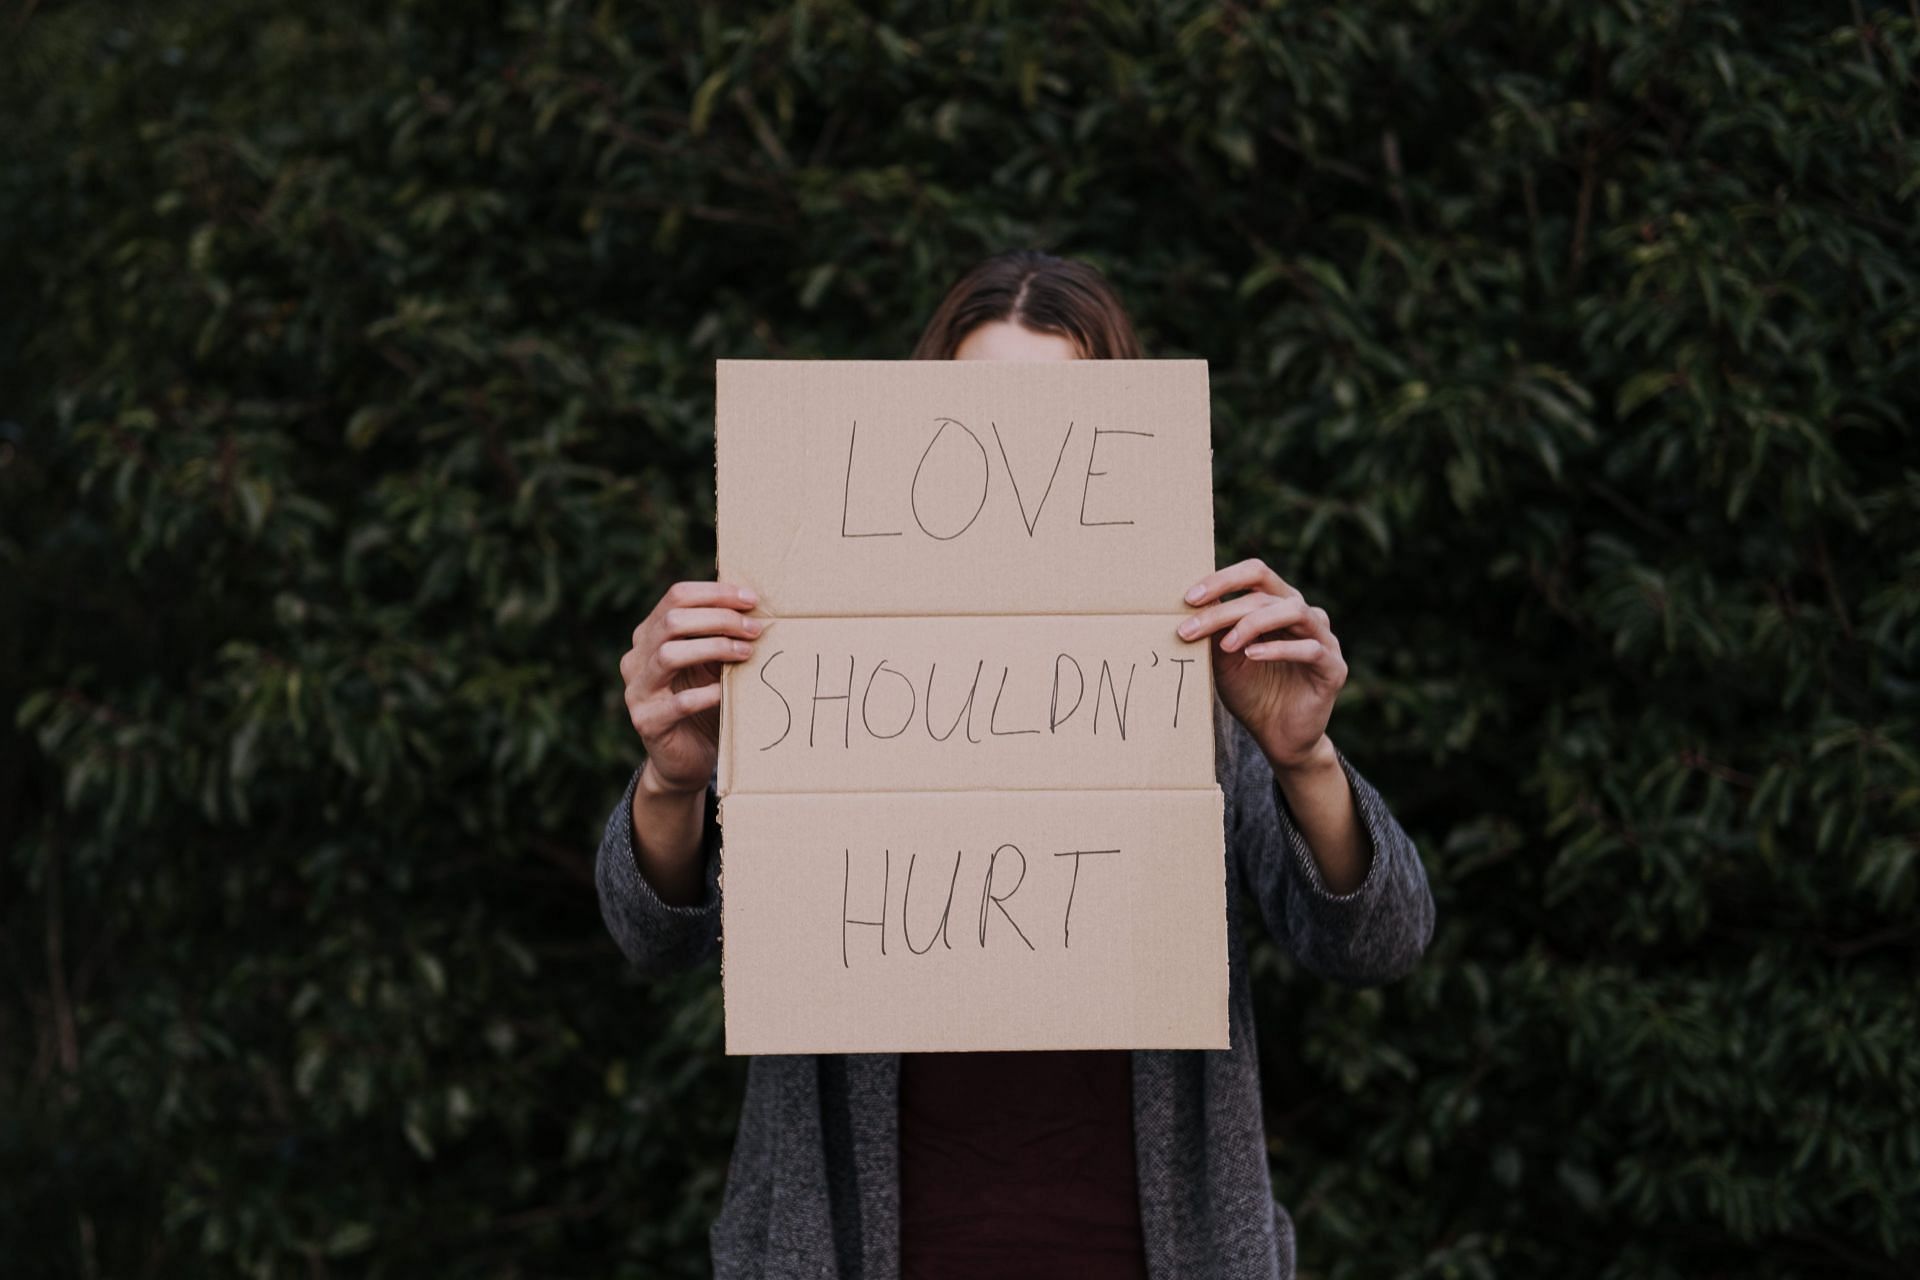 Sometimes love can hurt, we need to protect ourselves from gaslighting. (Image via Pexels/ Anete Lusina)